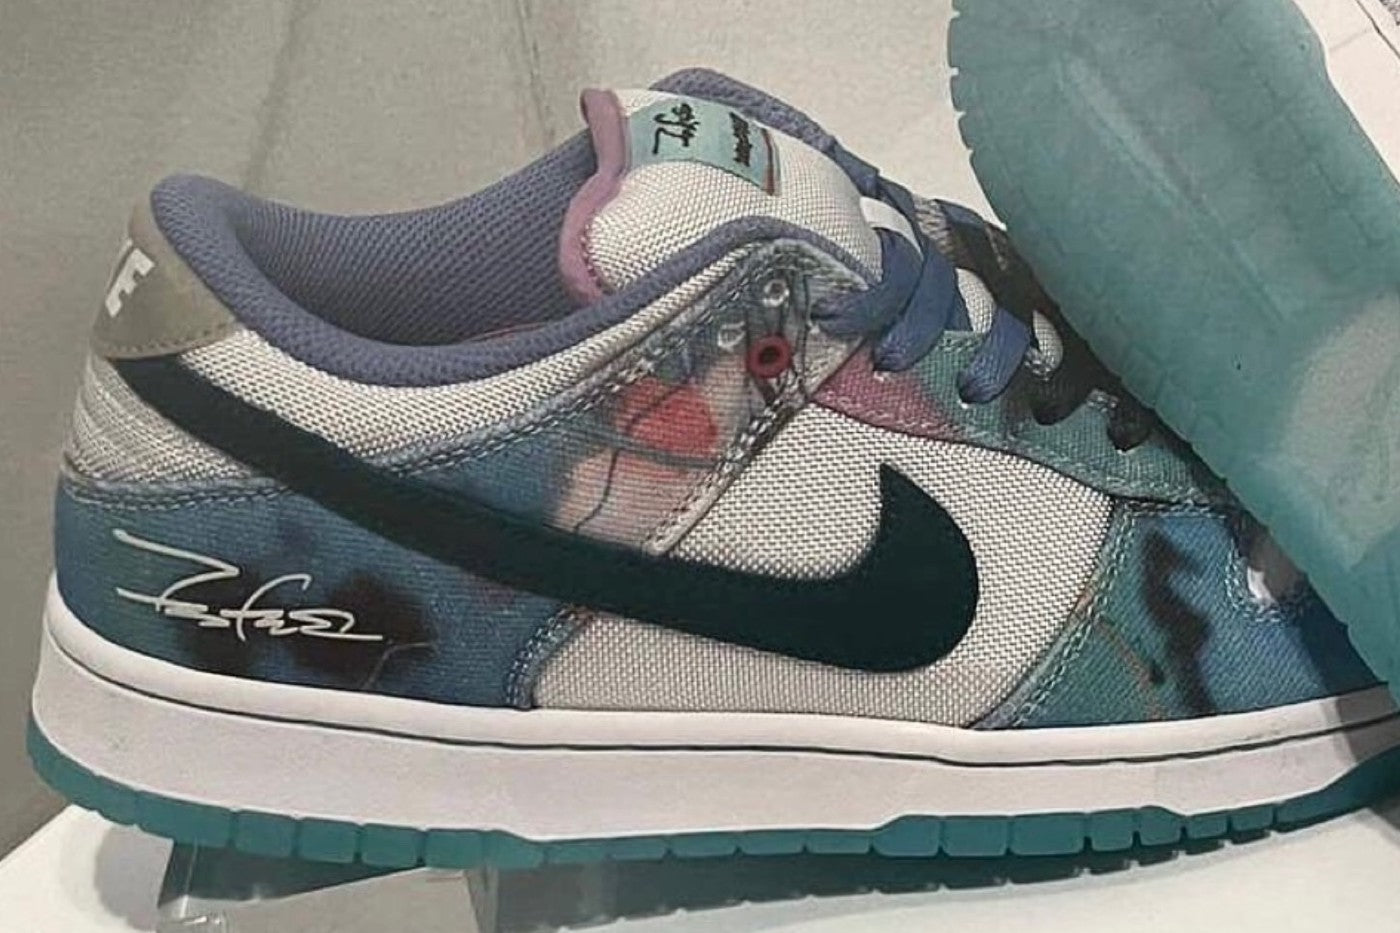 Take Your First Look at the Futura x Nike SB Dunk Low